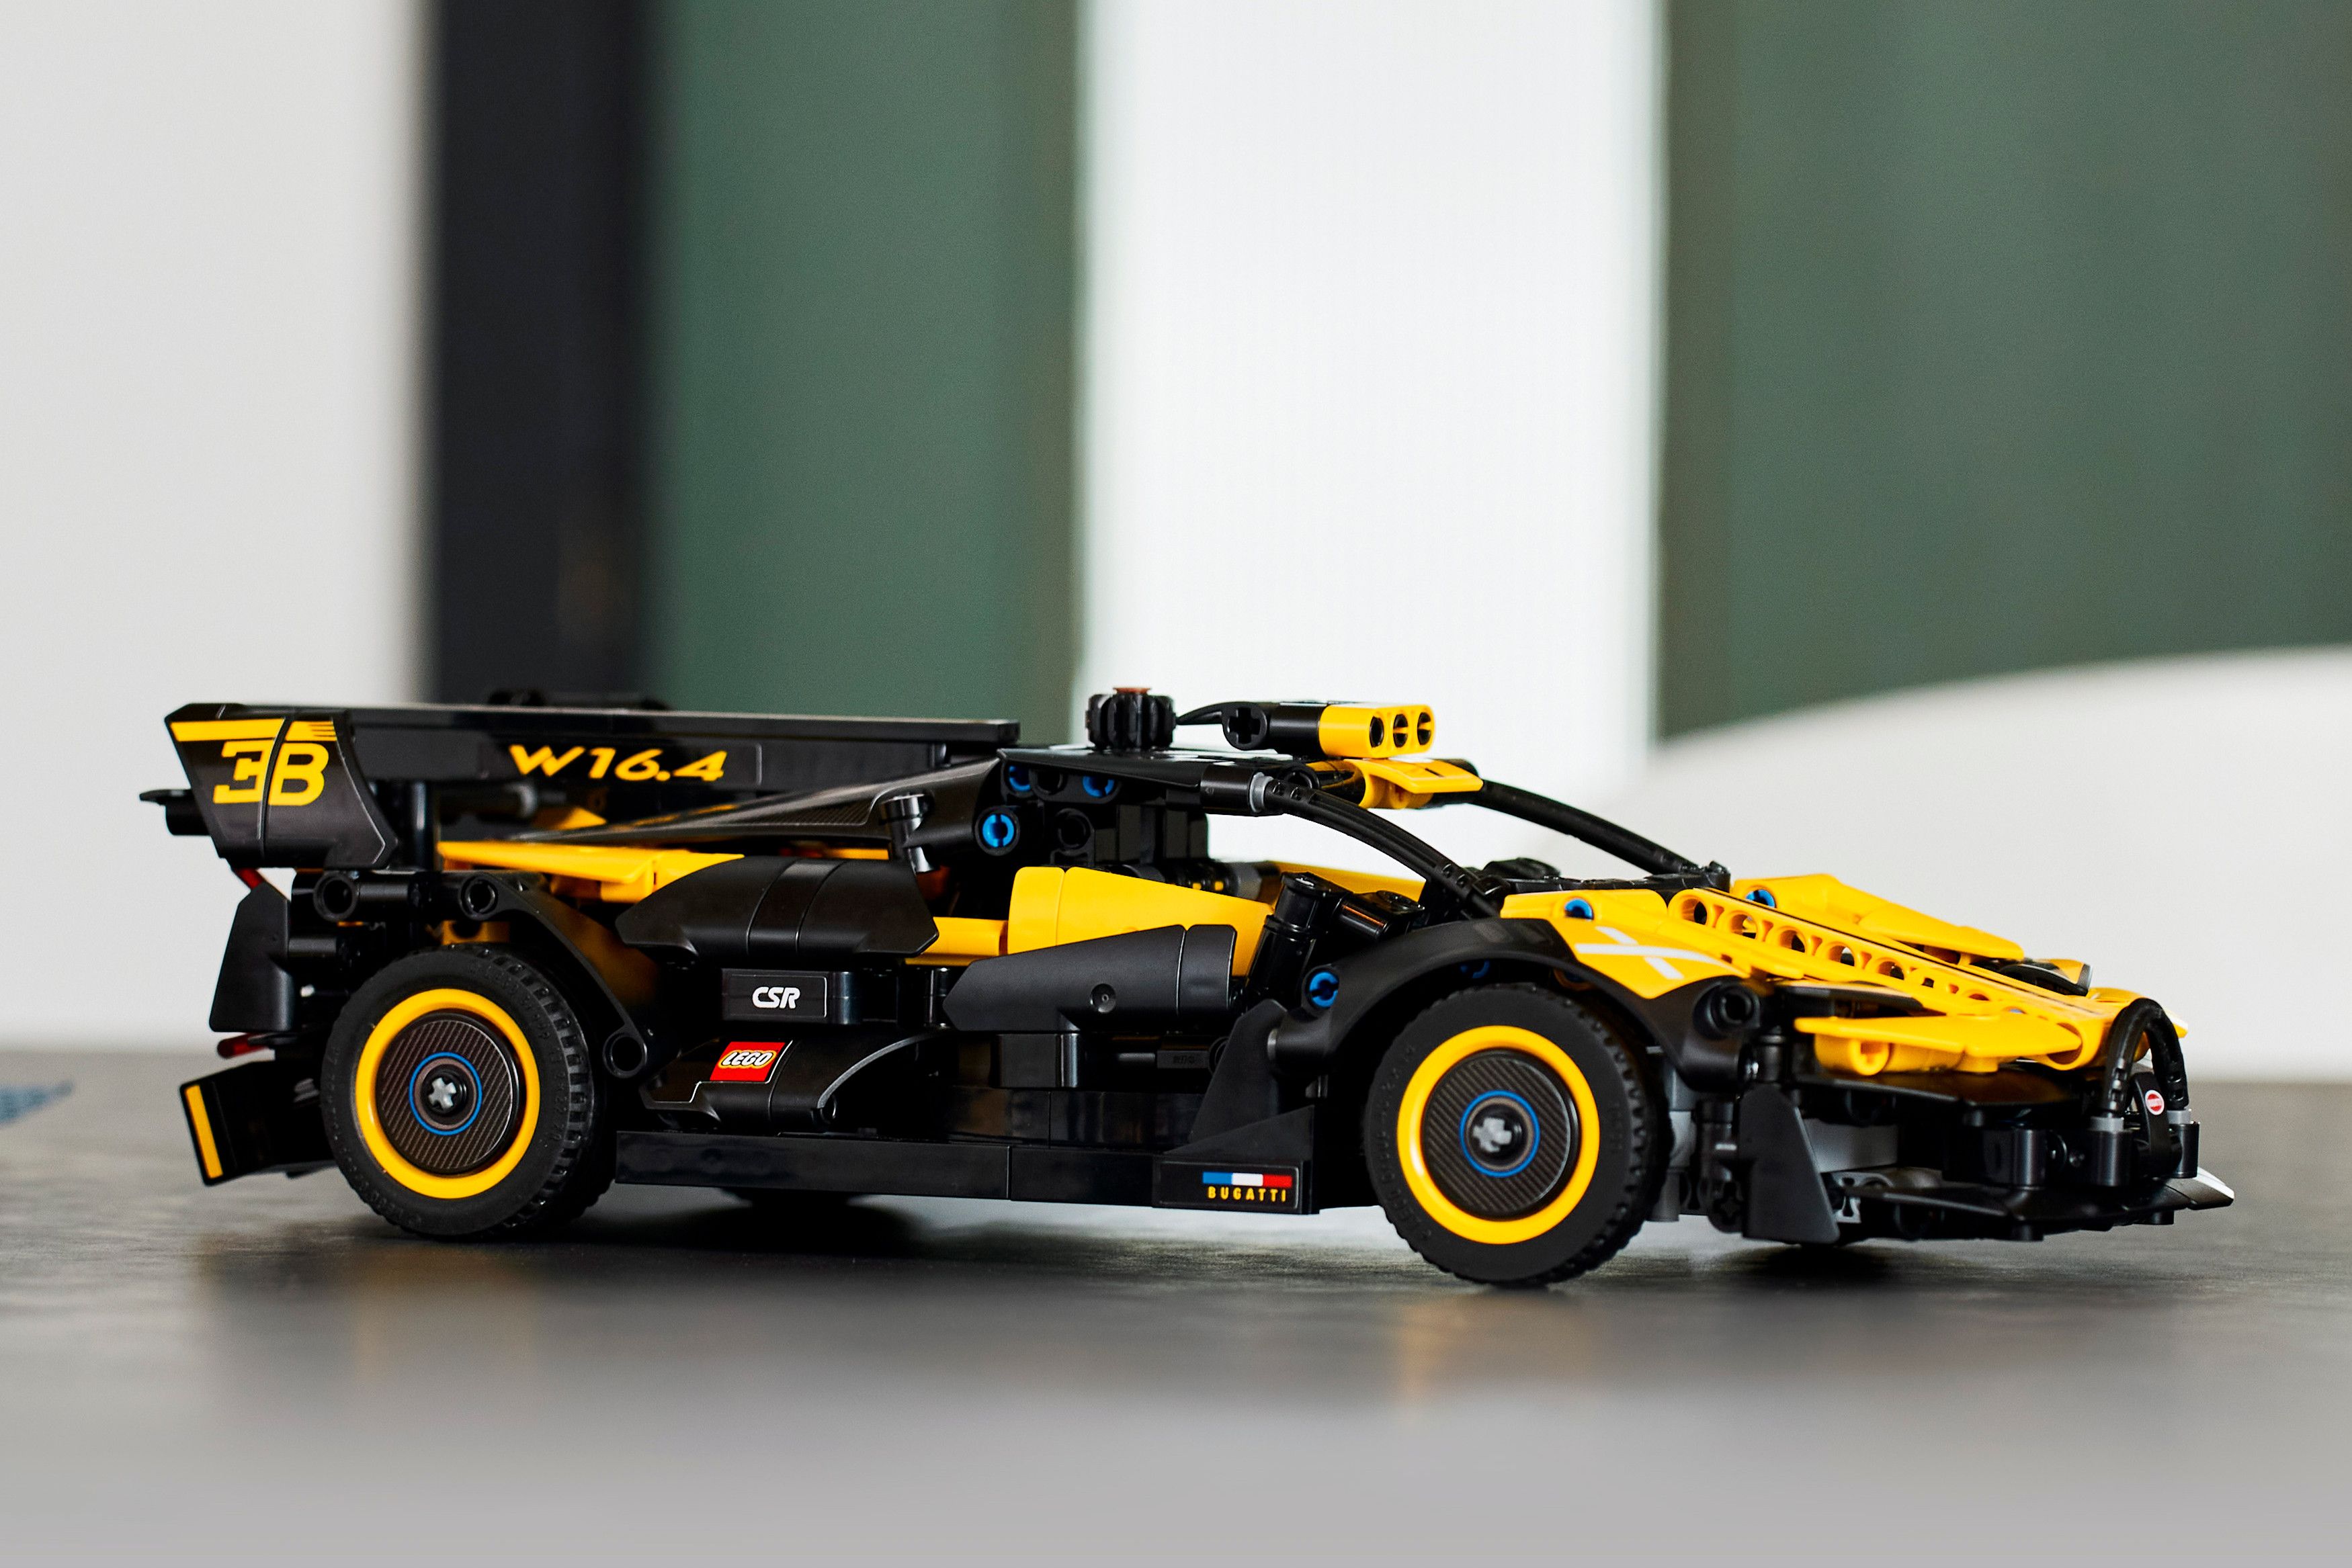 Lego Technic Bugatti Is a Supercar You Can Build at Home